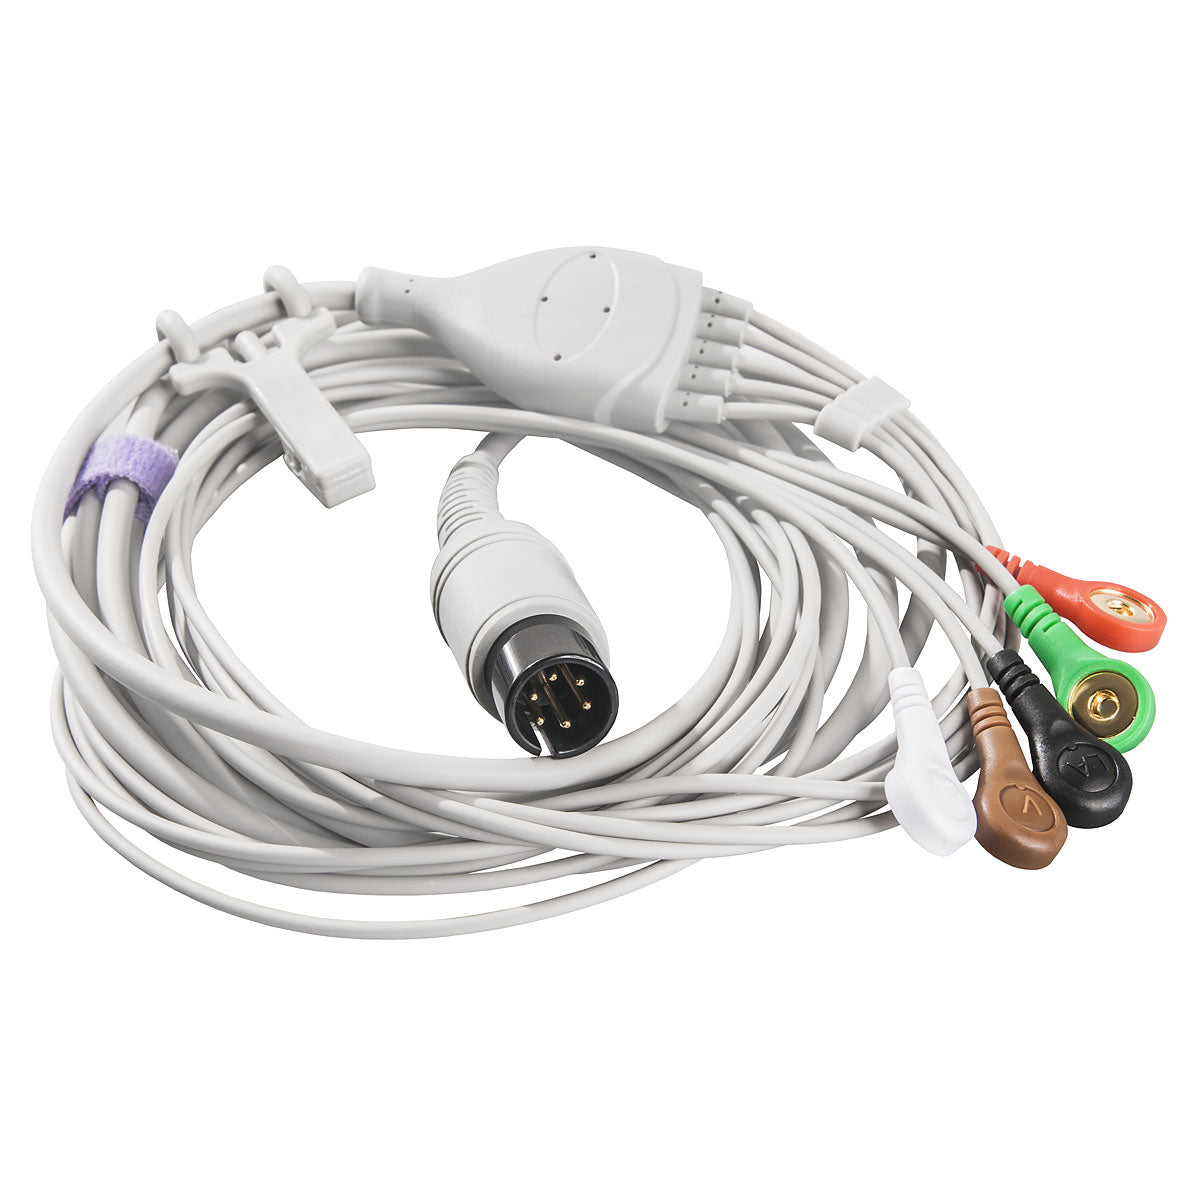 Direct-Connect ECG 5-Leads Snap Cable